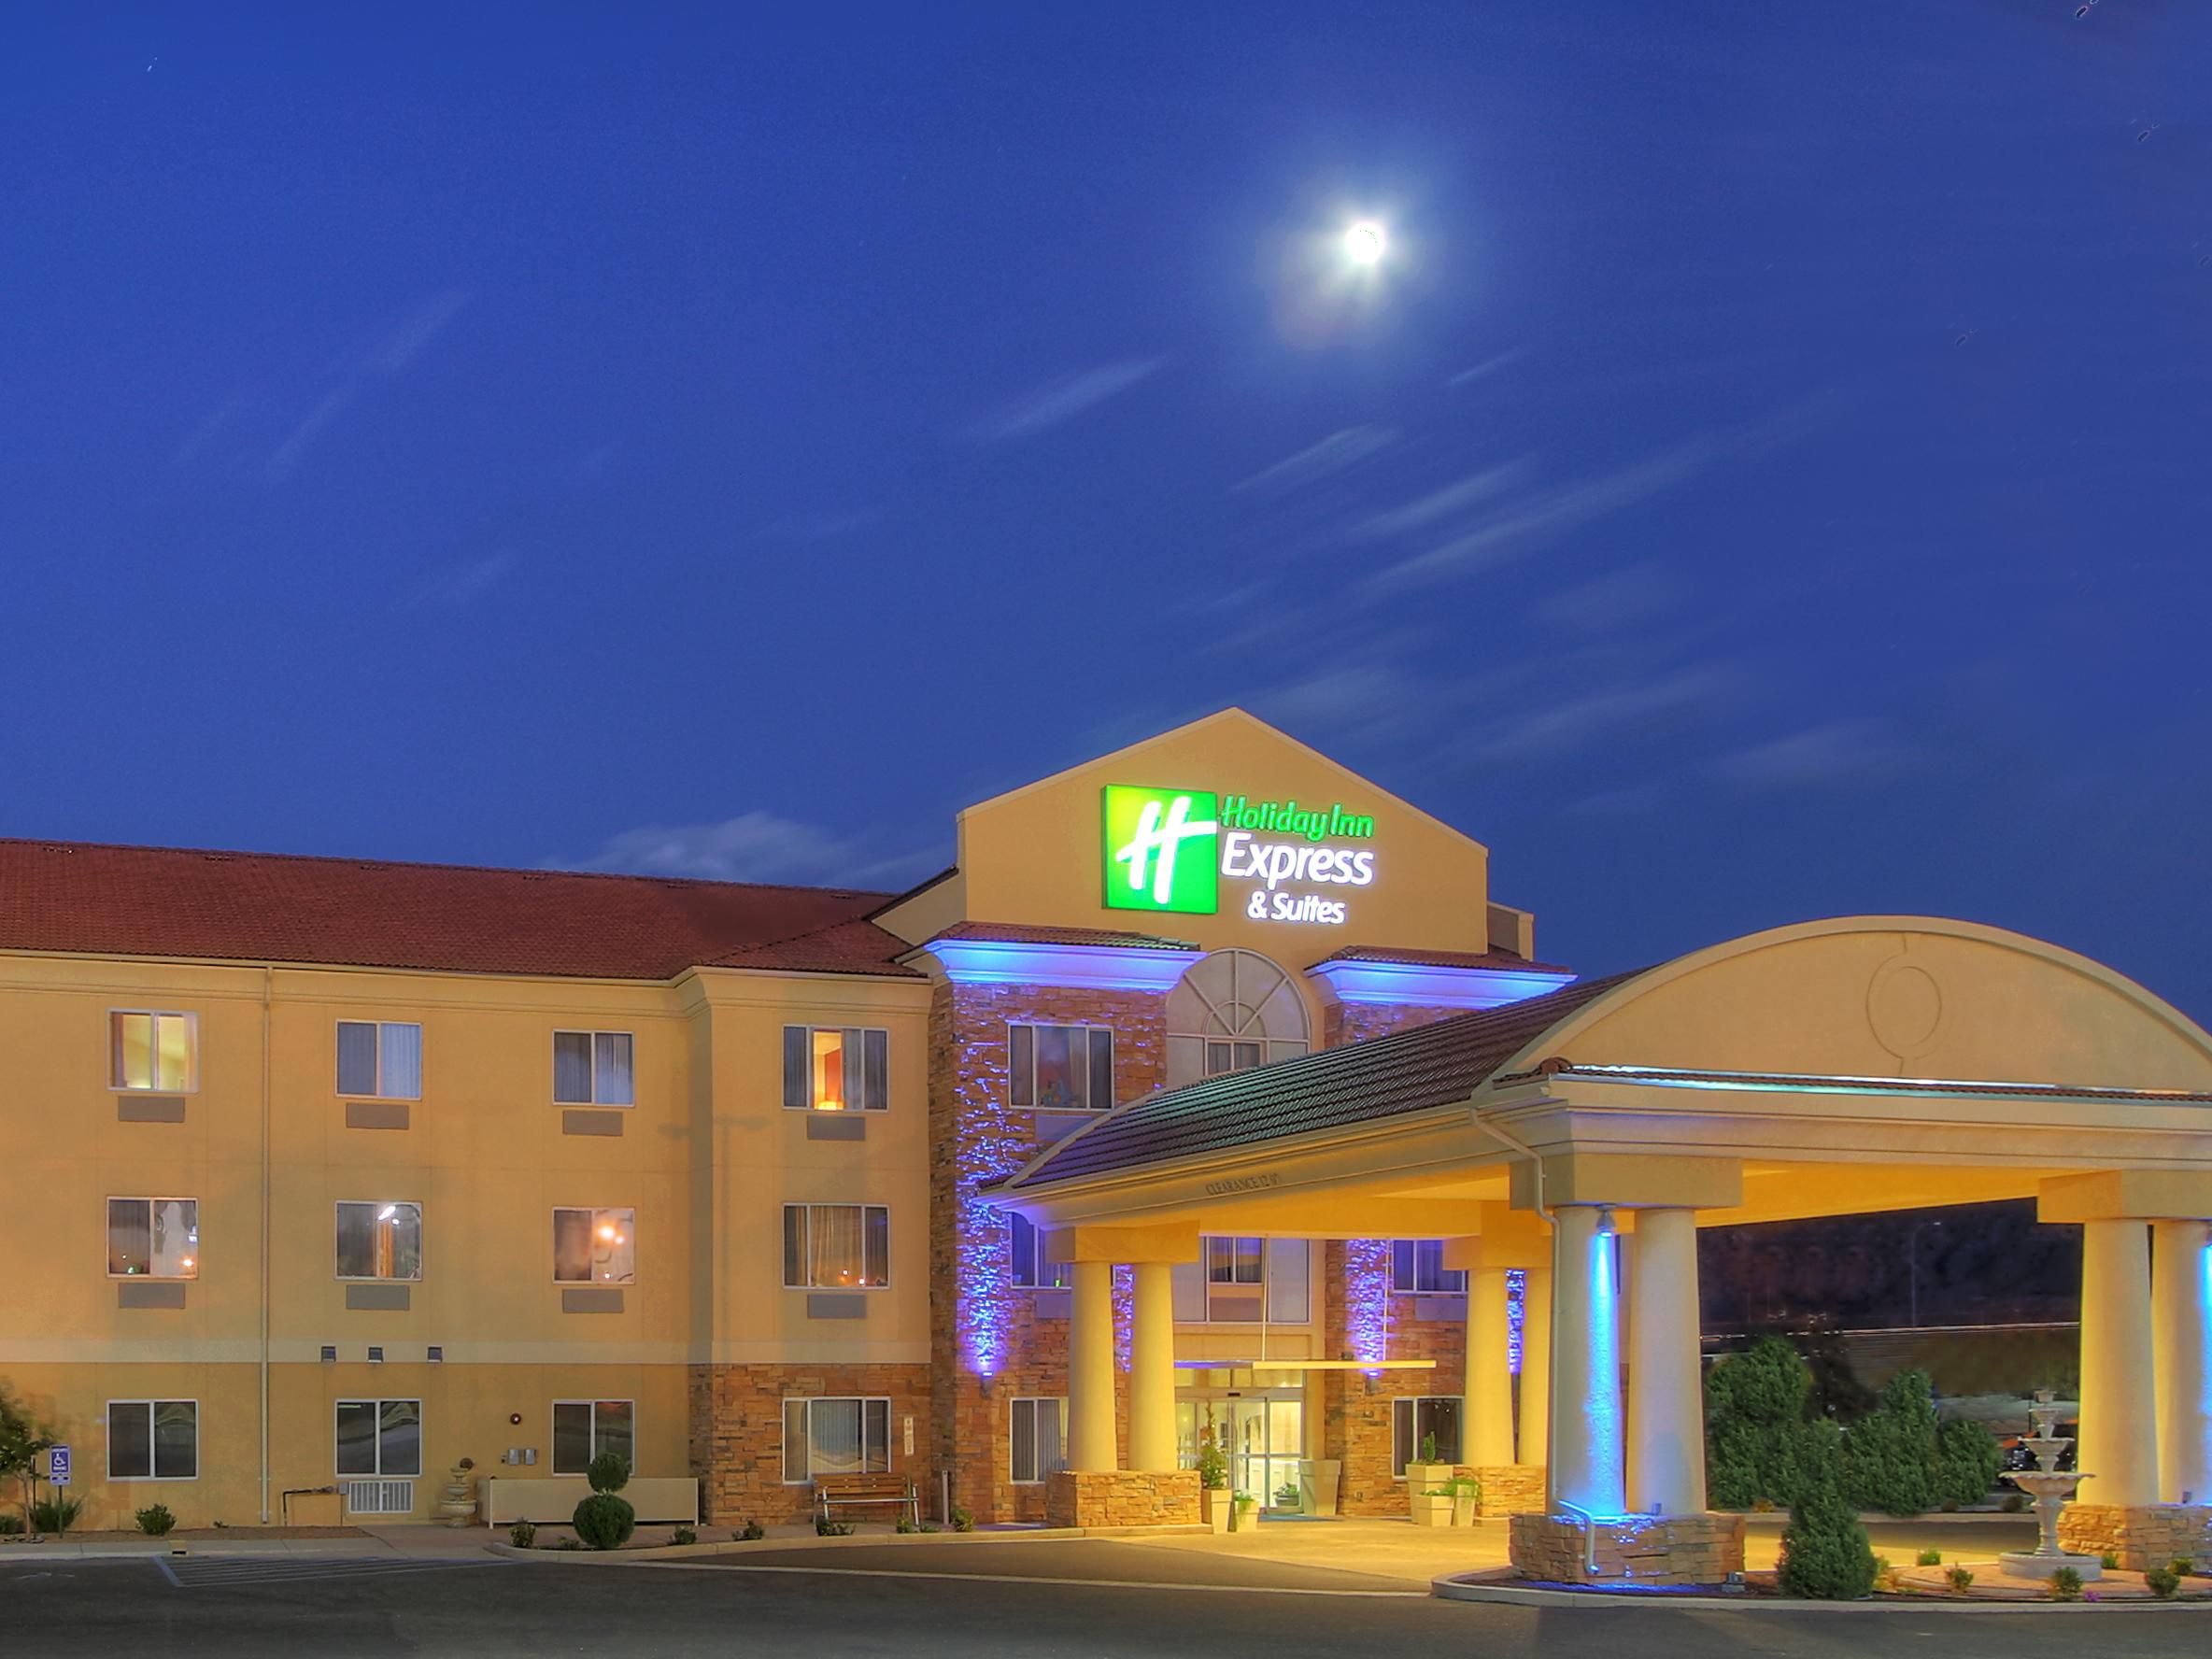 Holiday Inn Express And Suites Tucumcari 2532255580 4x3